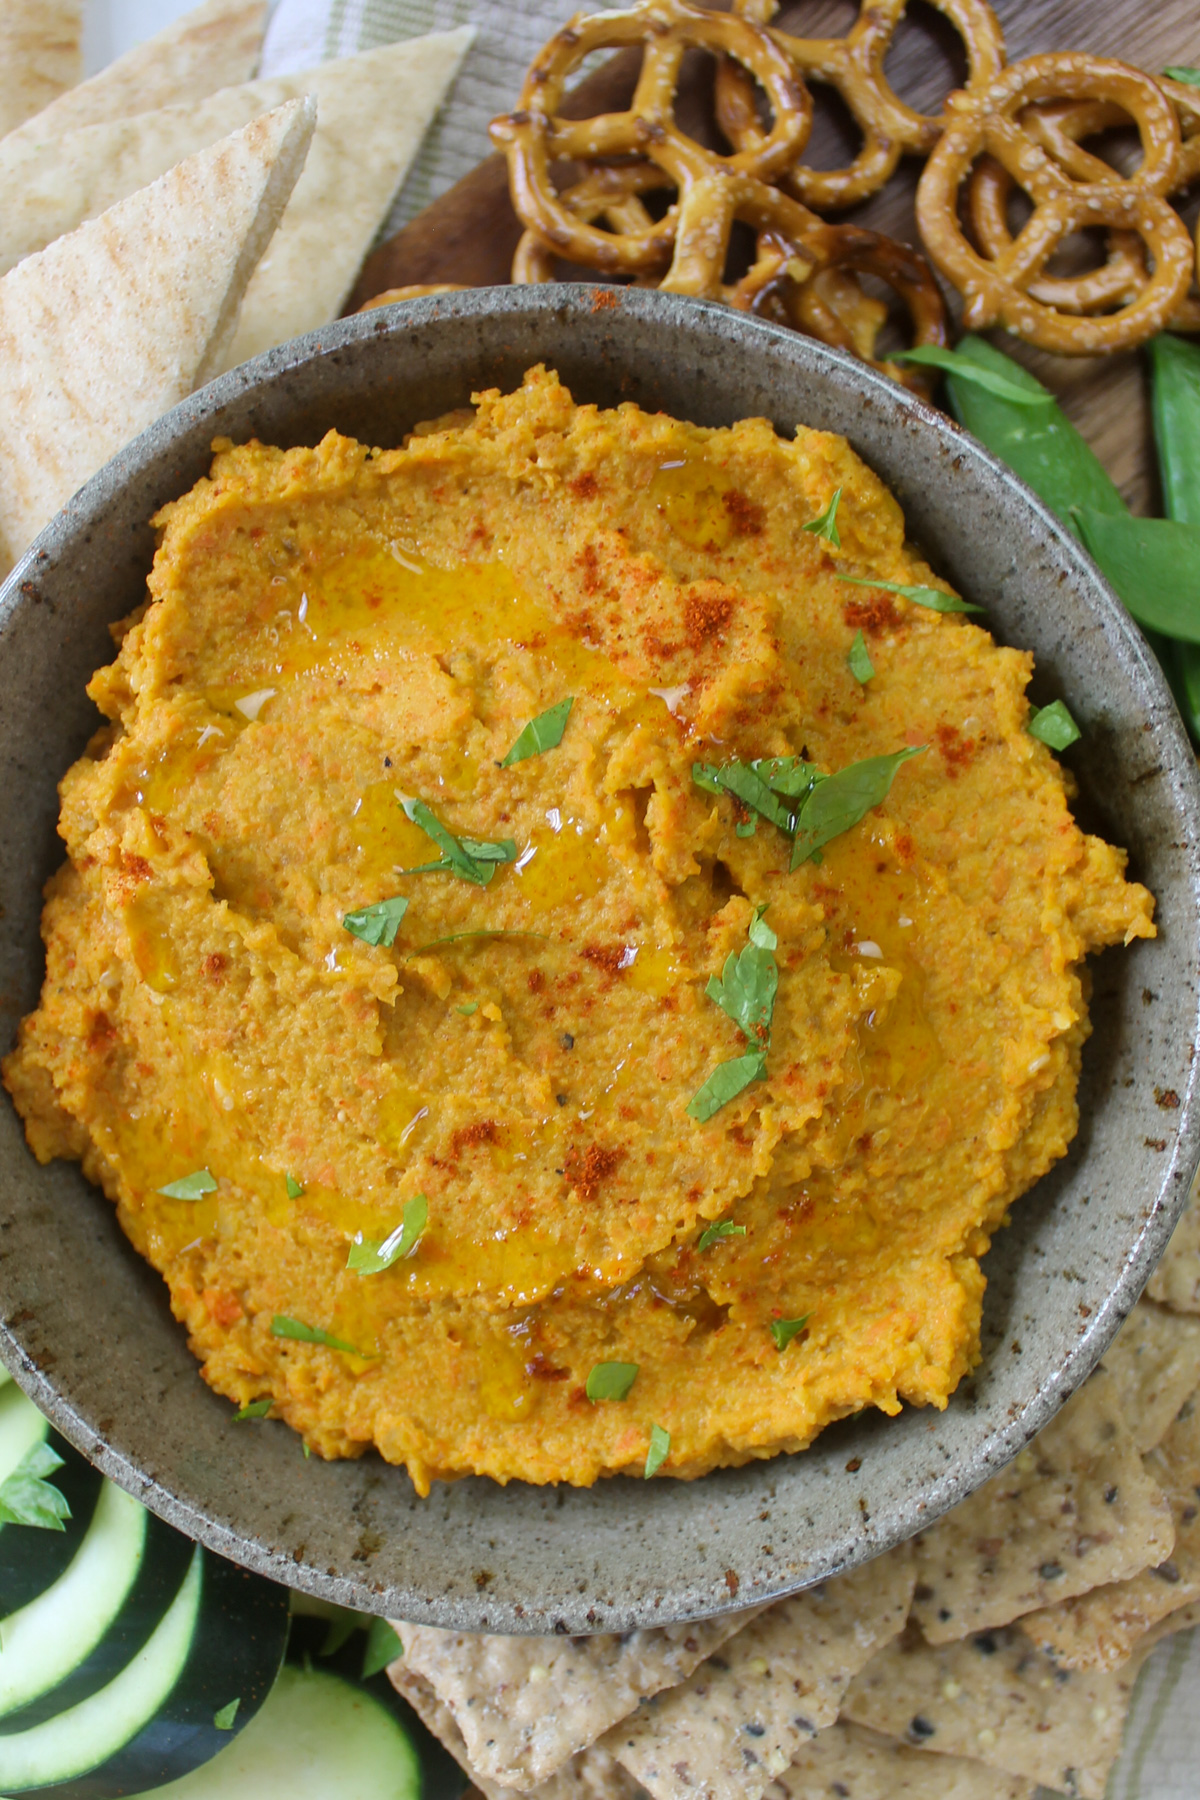 High protein hummus made with roasted carrot, onion and garlic.